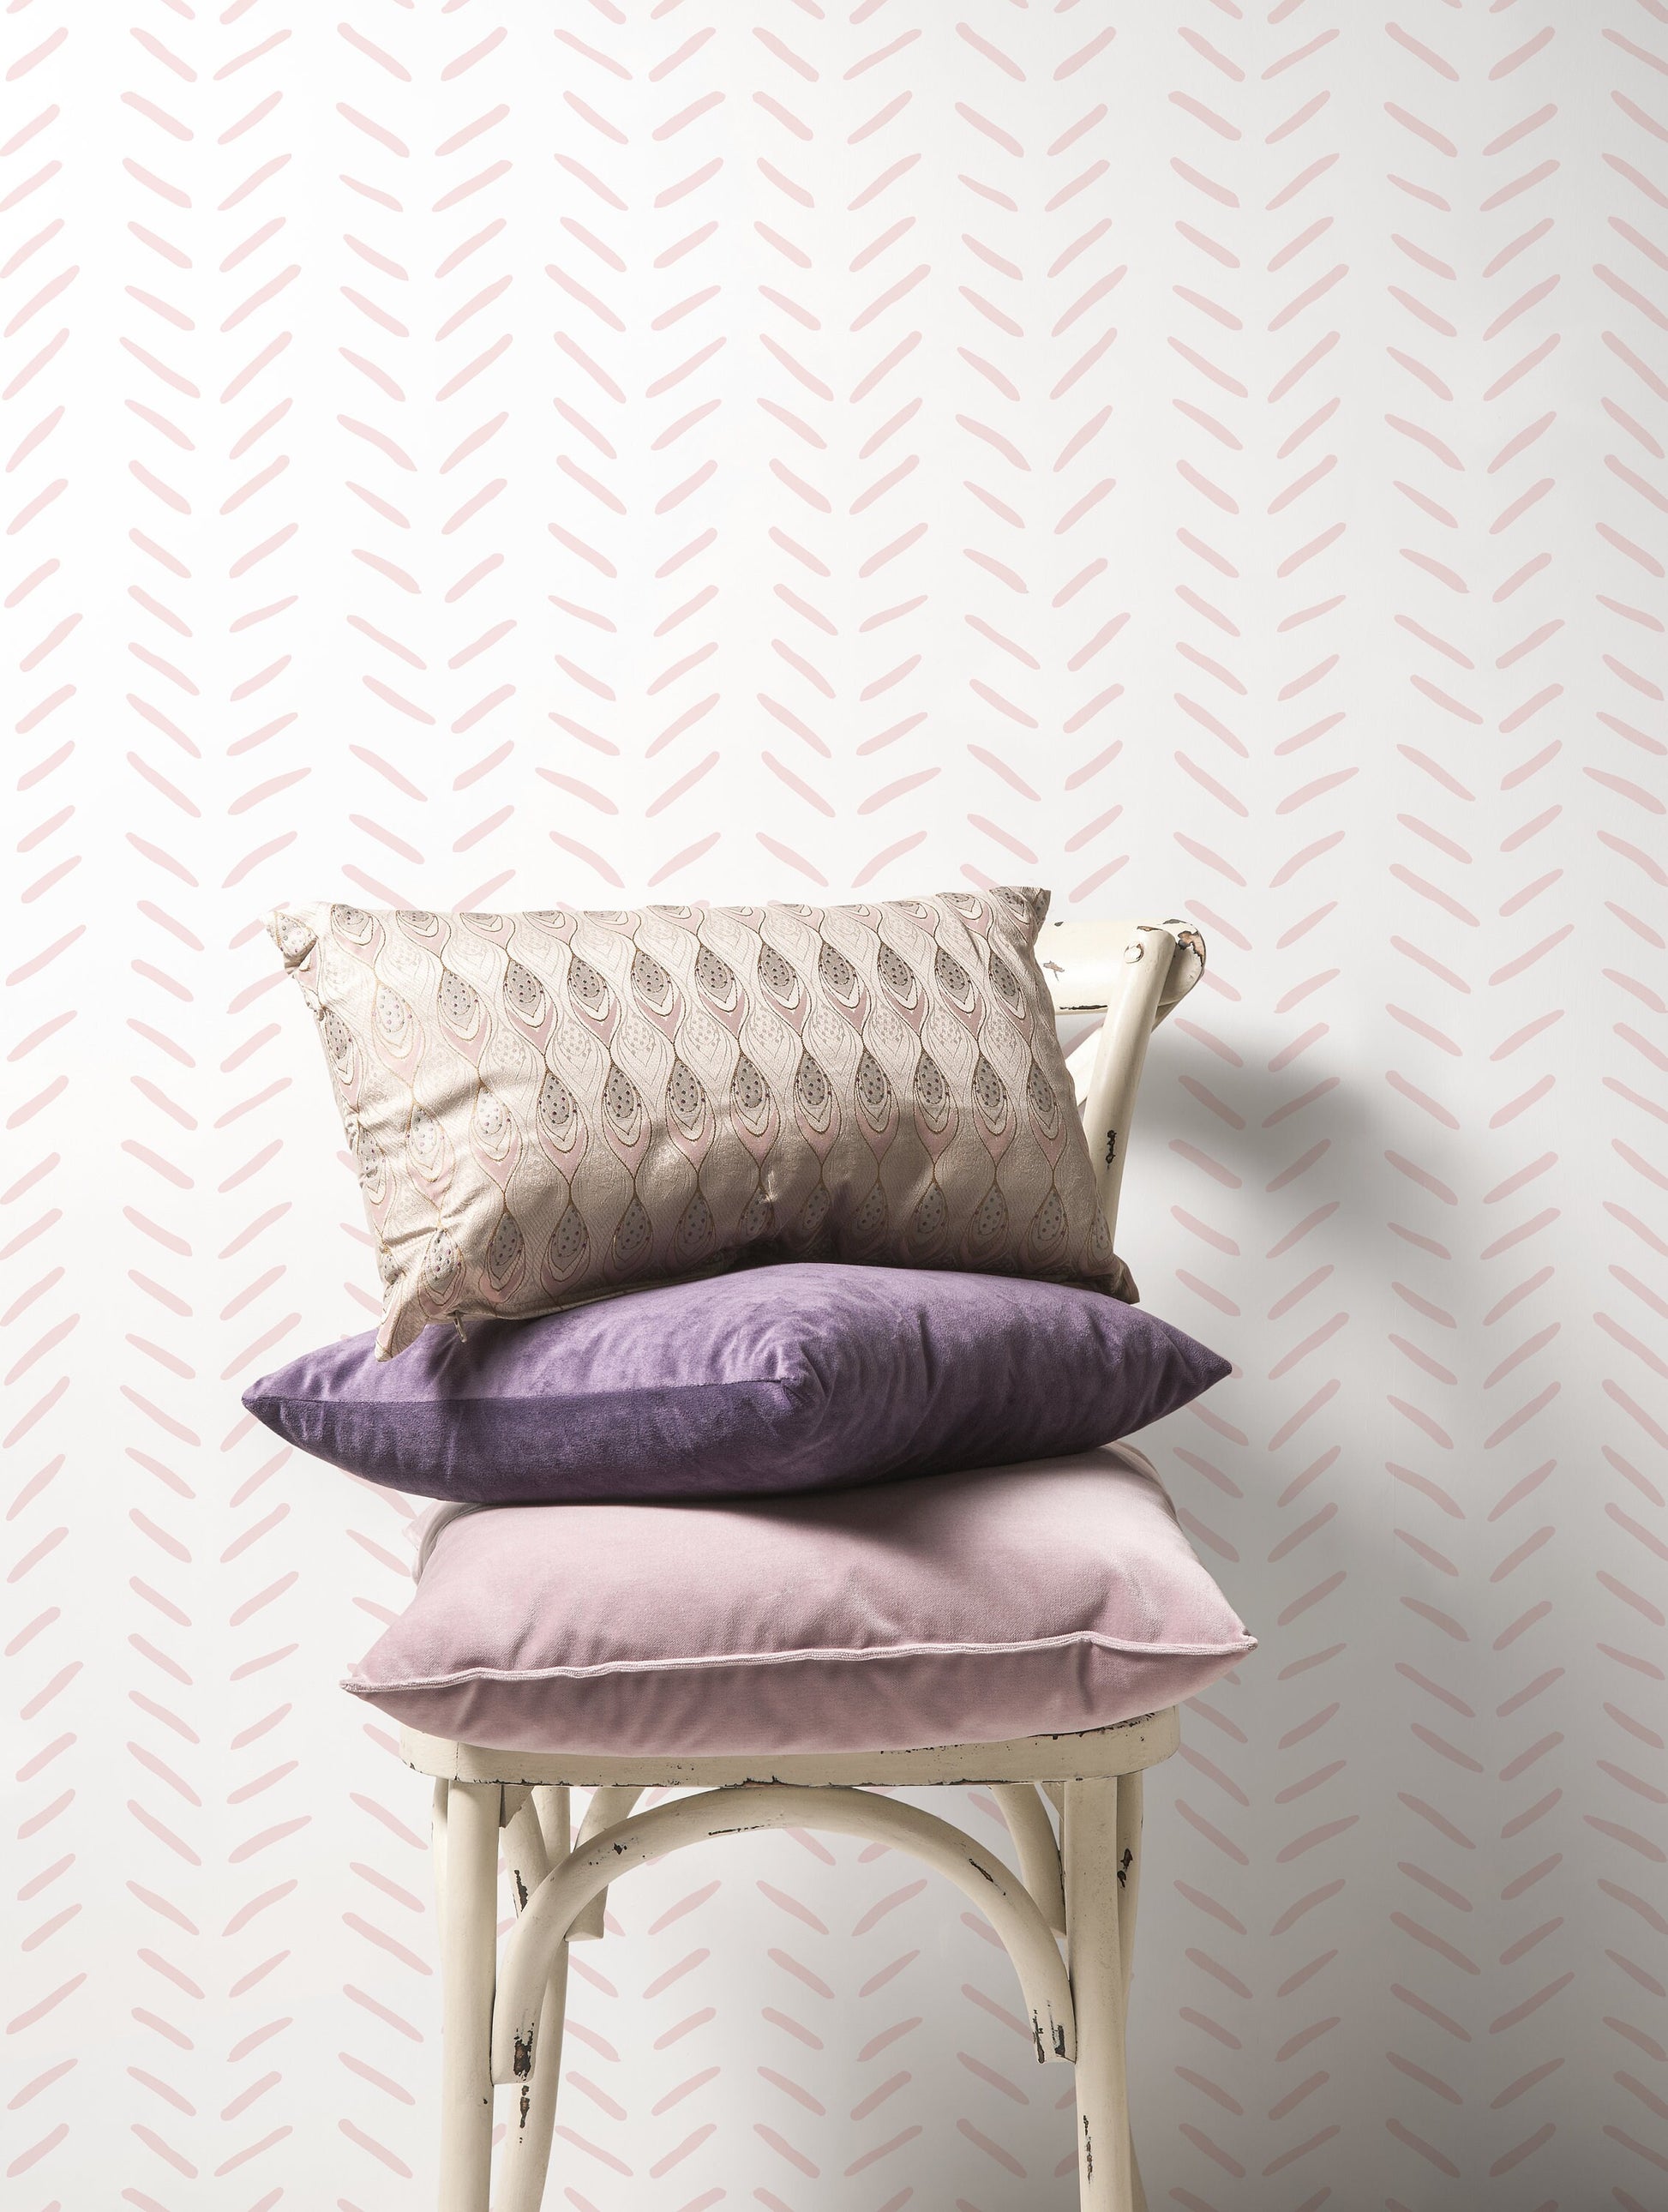 Boho Herringbone in Soft Pink Wallpaper Removable and Repositionable Peel and Stick or Traditional Pre-pasted Wallpaper - ZACI